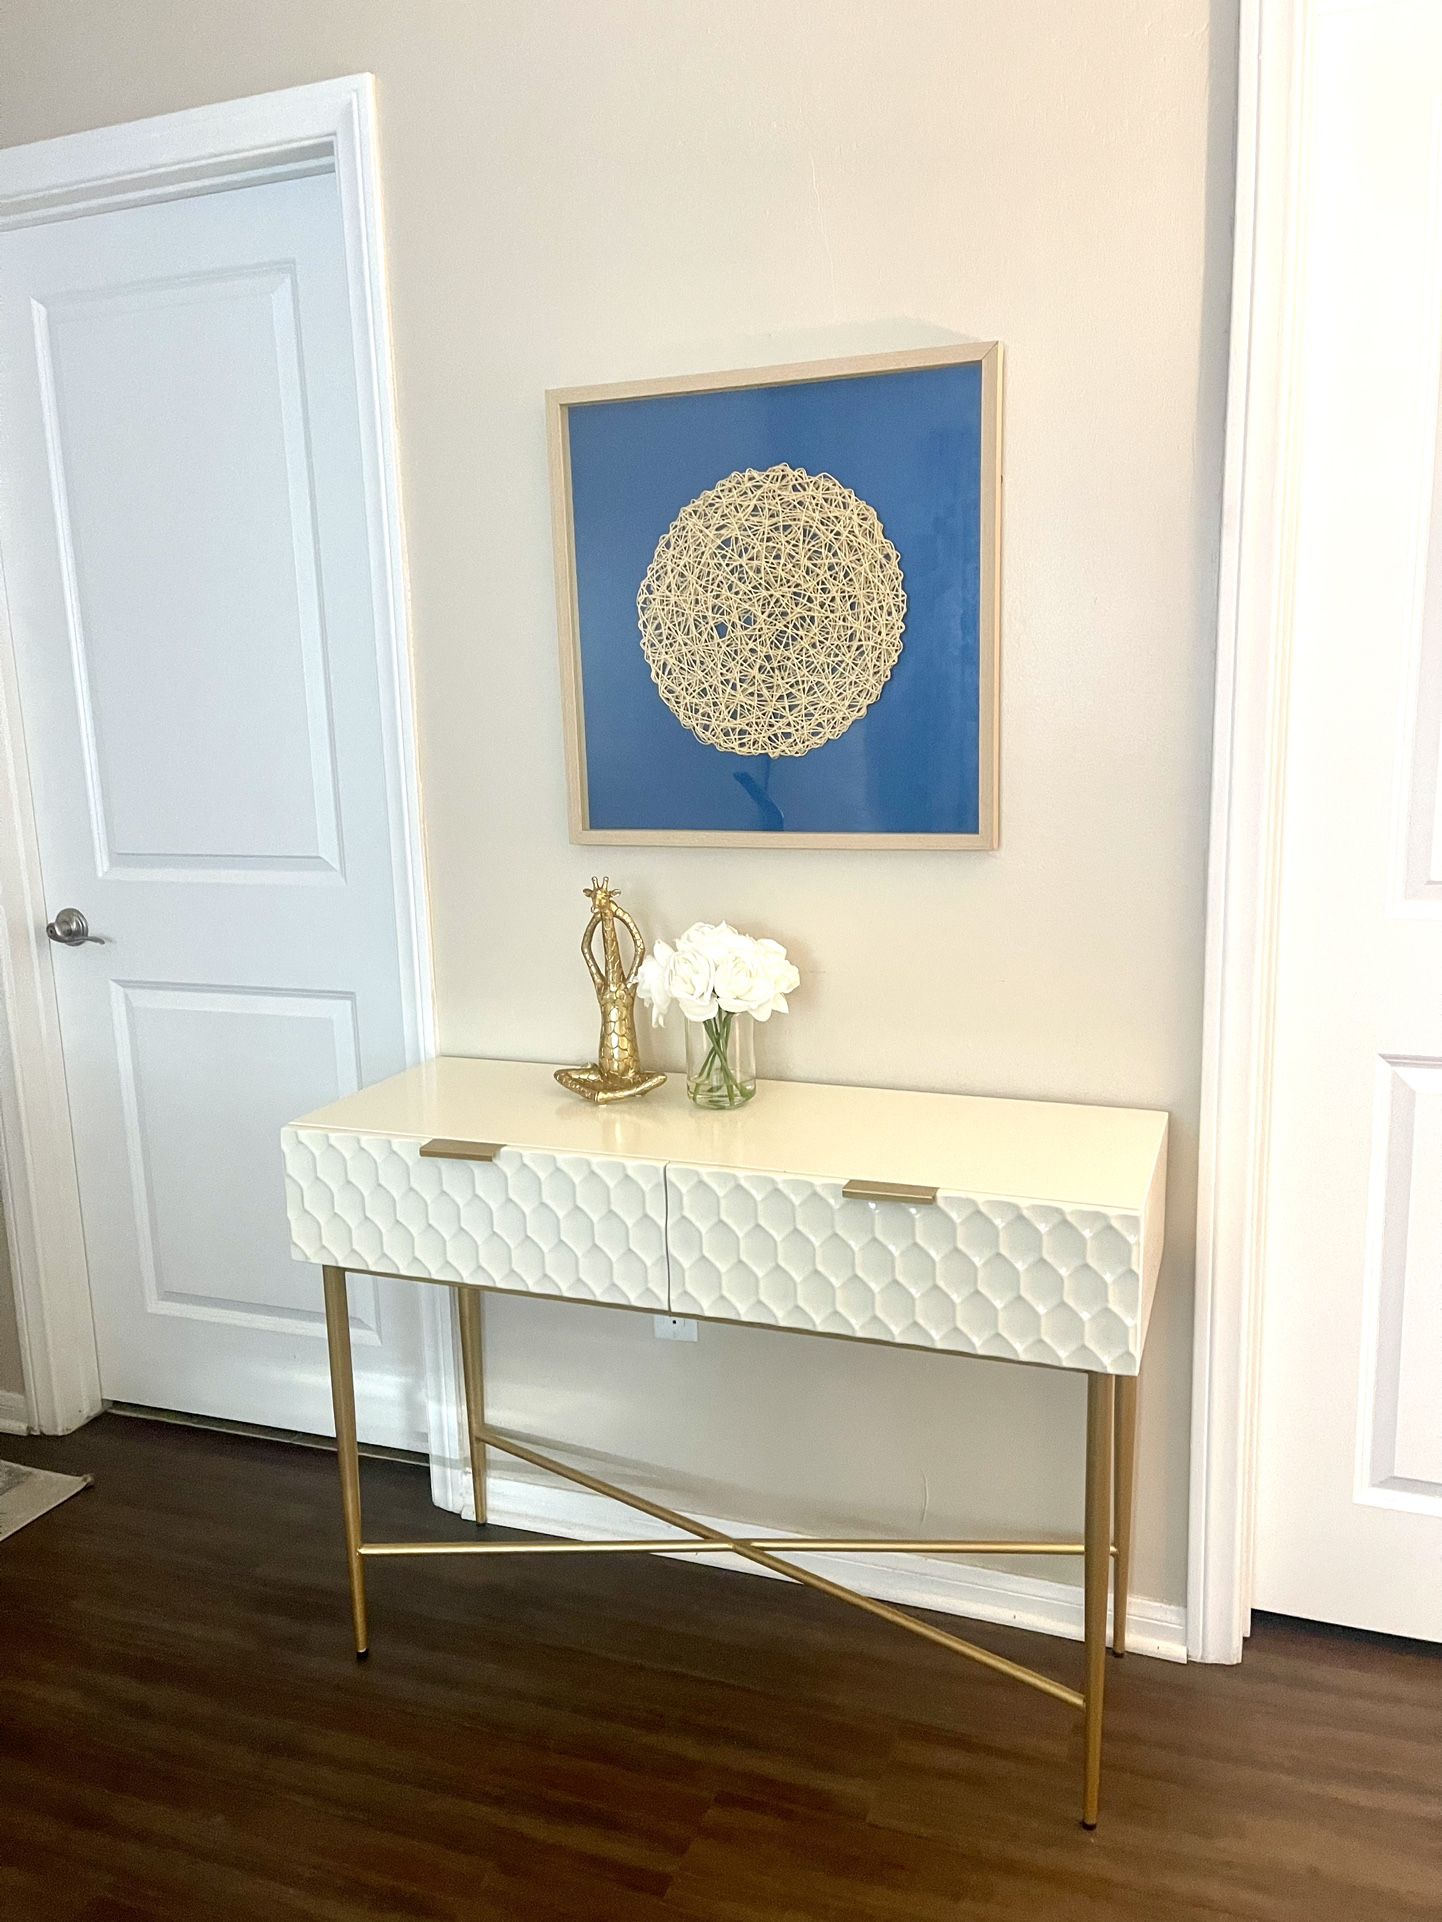 Console  Table